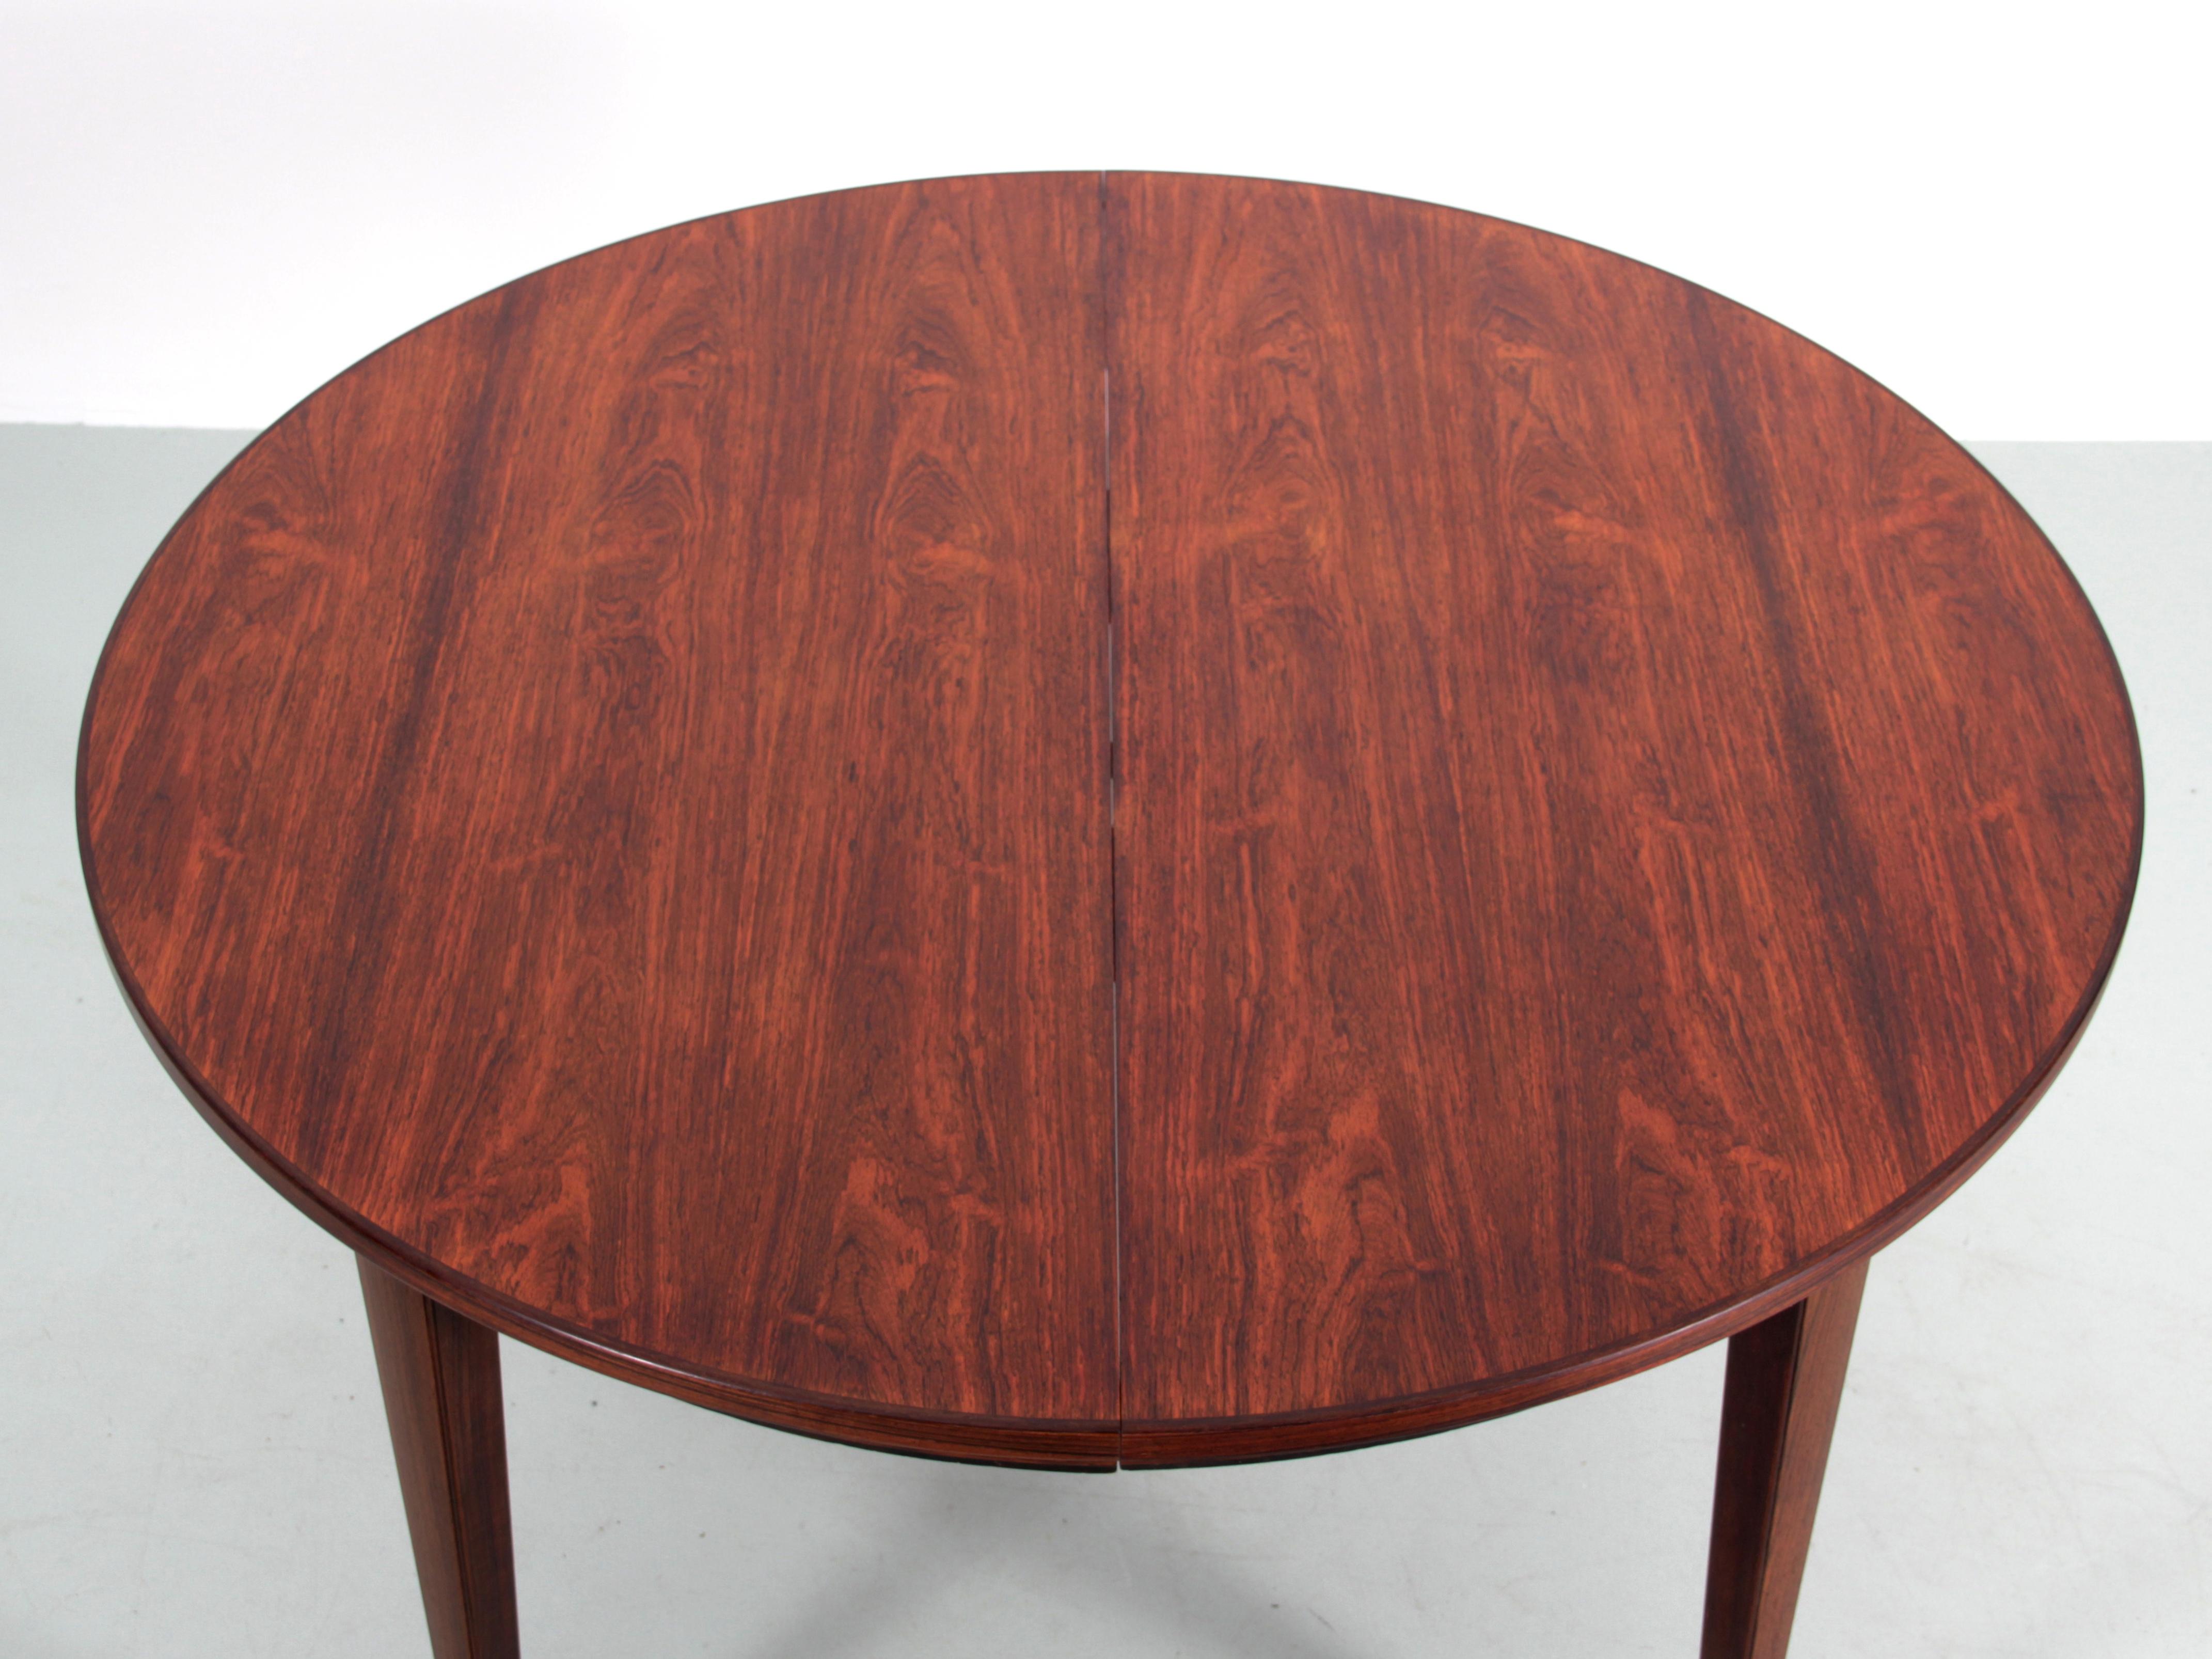 Scandinavian Modern Mid-Century Modern Scandinavian Dining Table in Rosewood with 3 Extra Leaves